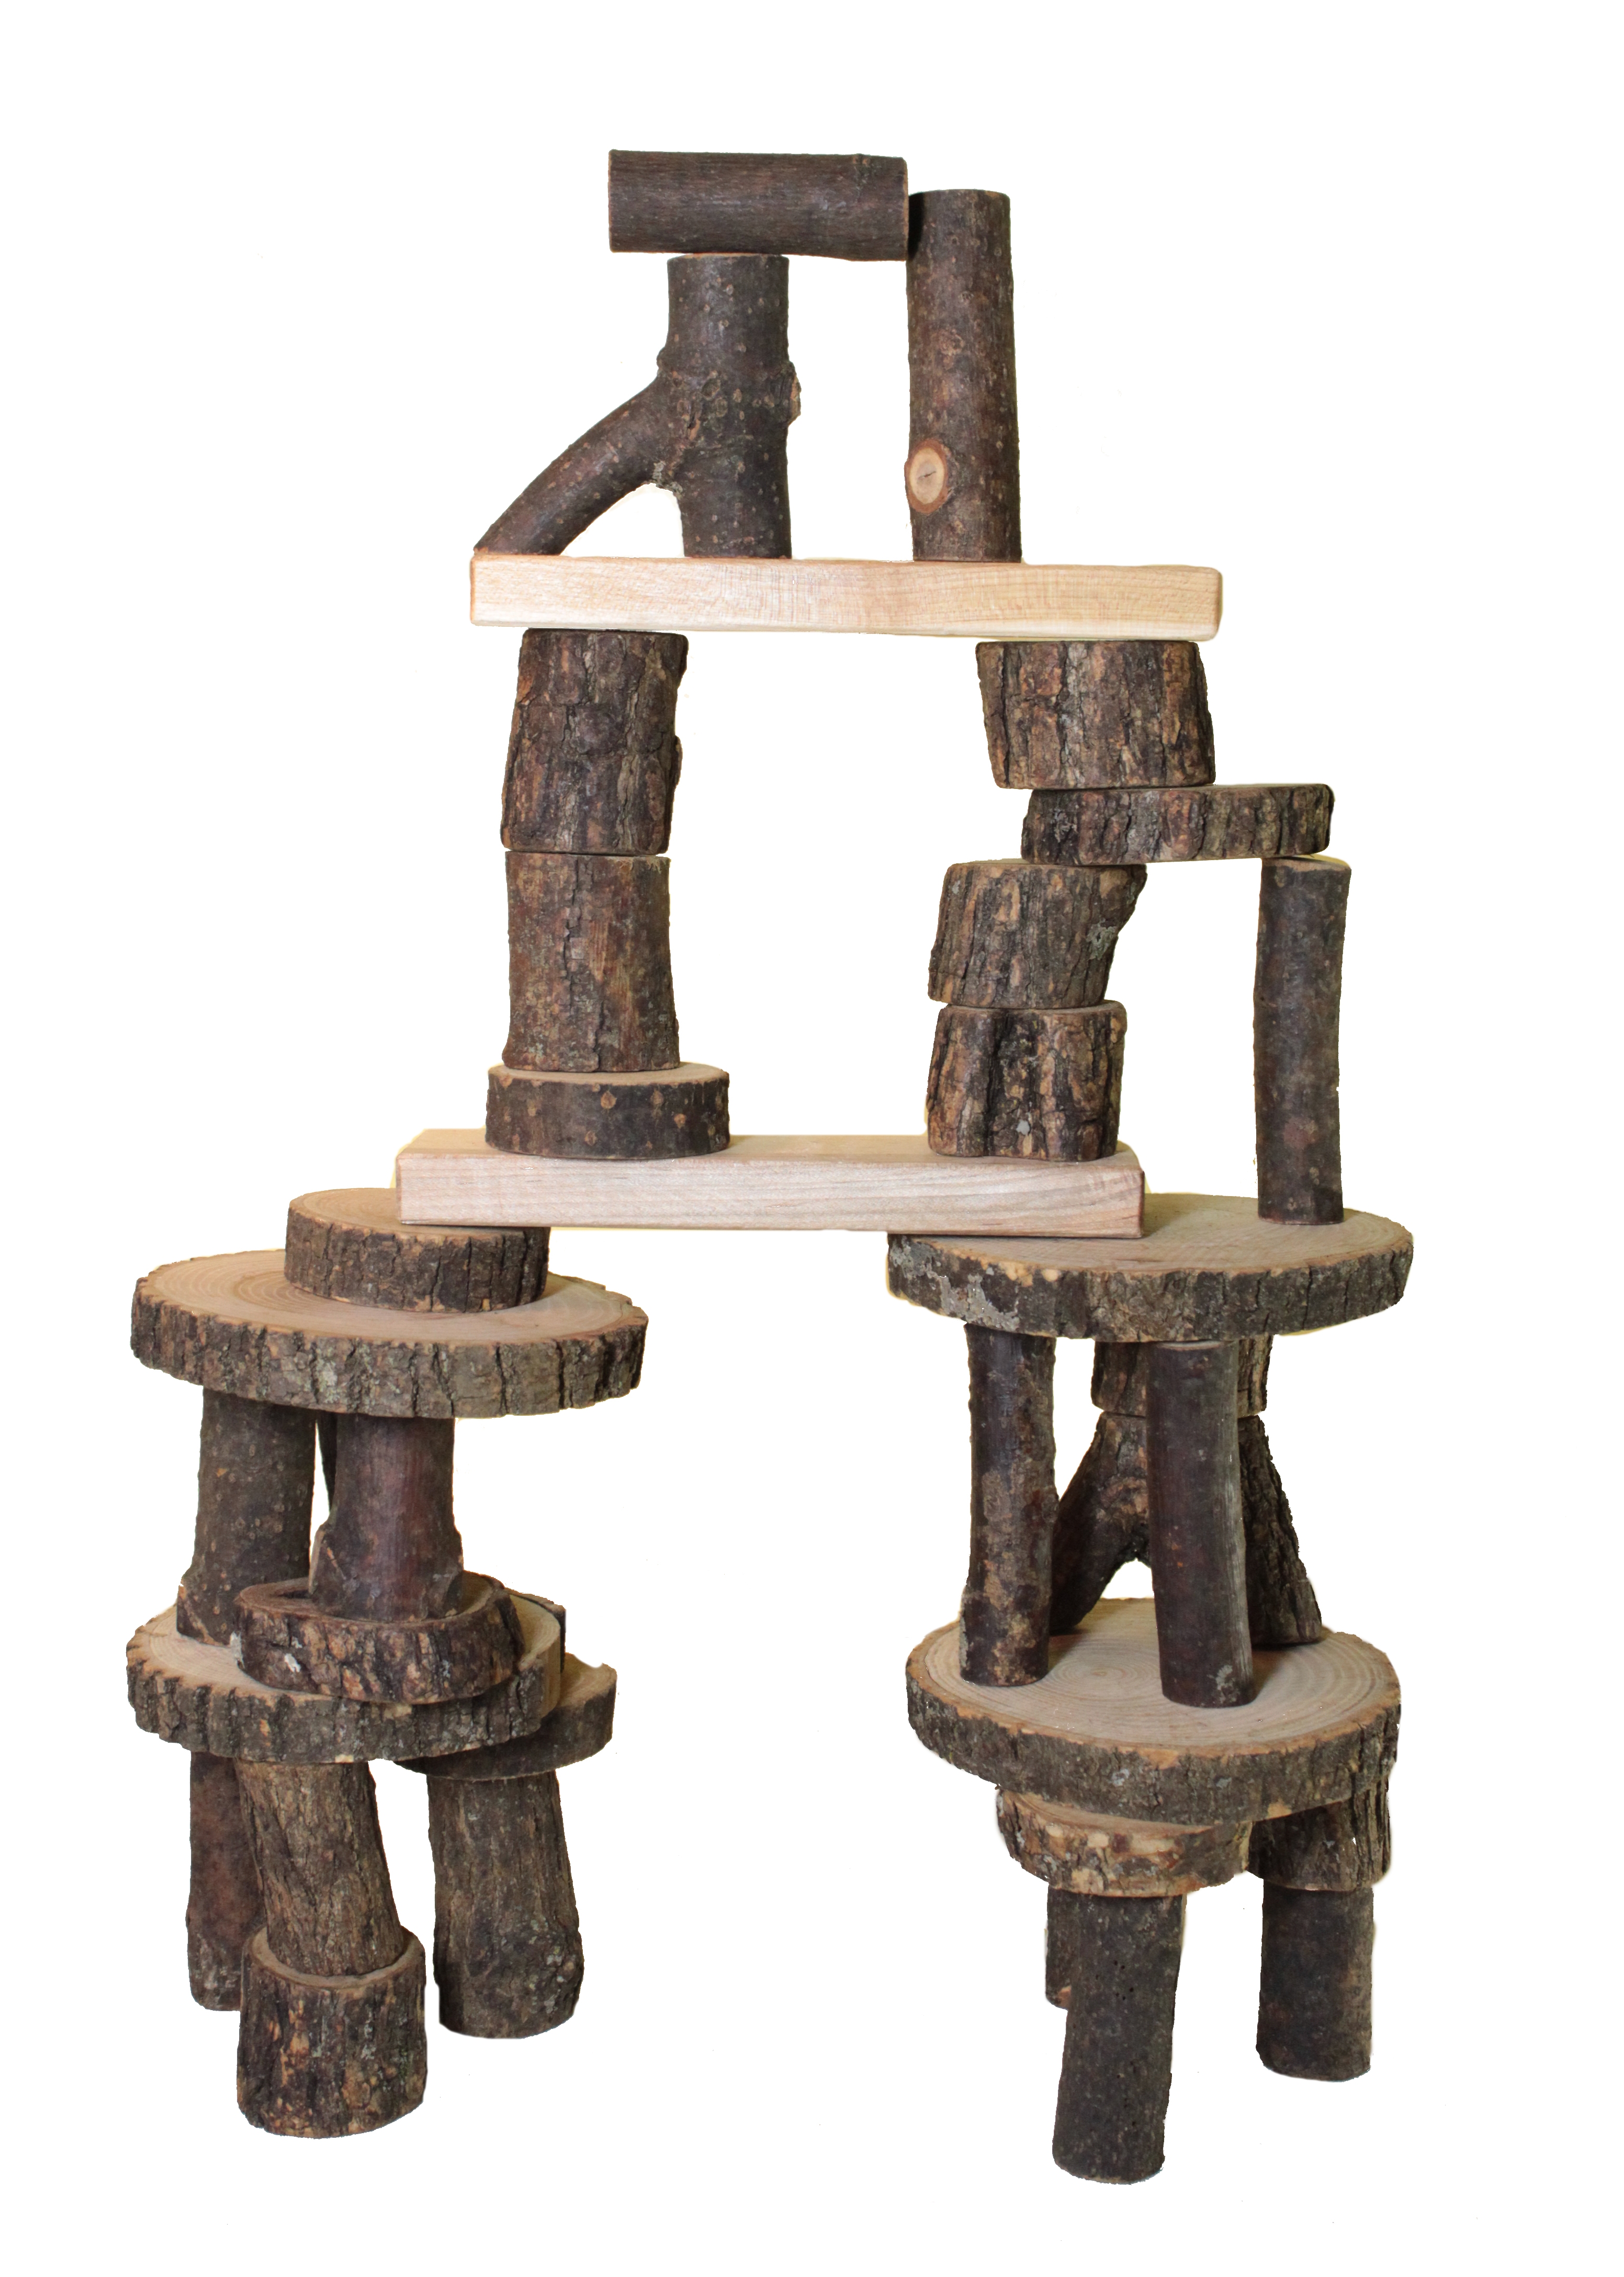 Tree blocks unit blocks, are a sustainable, eco friendly toy made of natural wood.